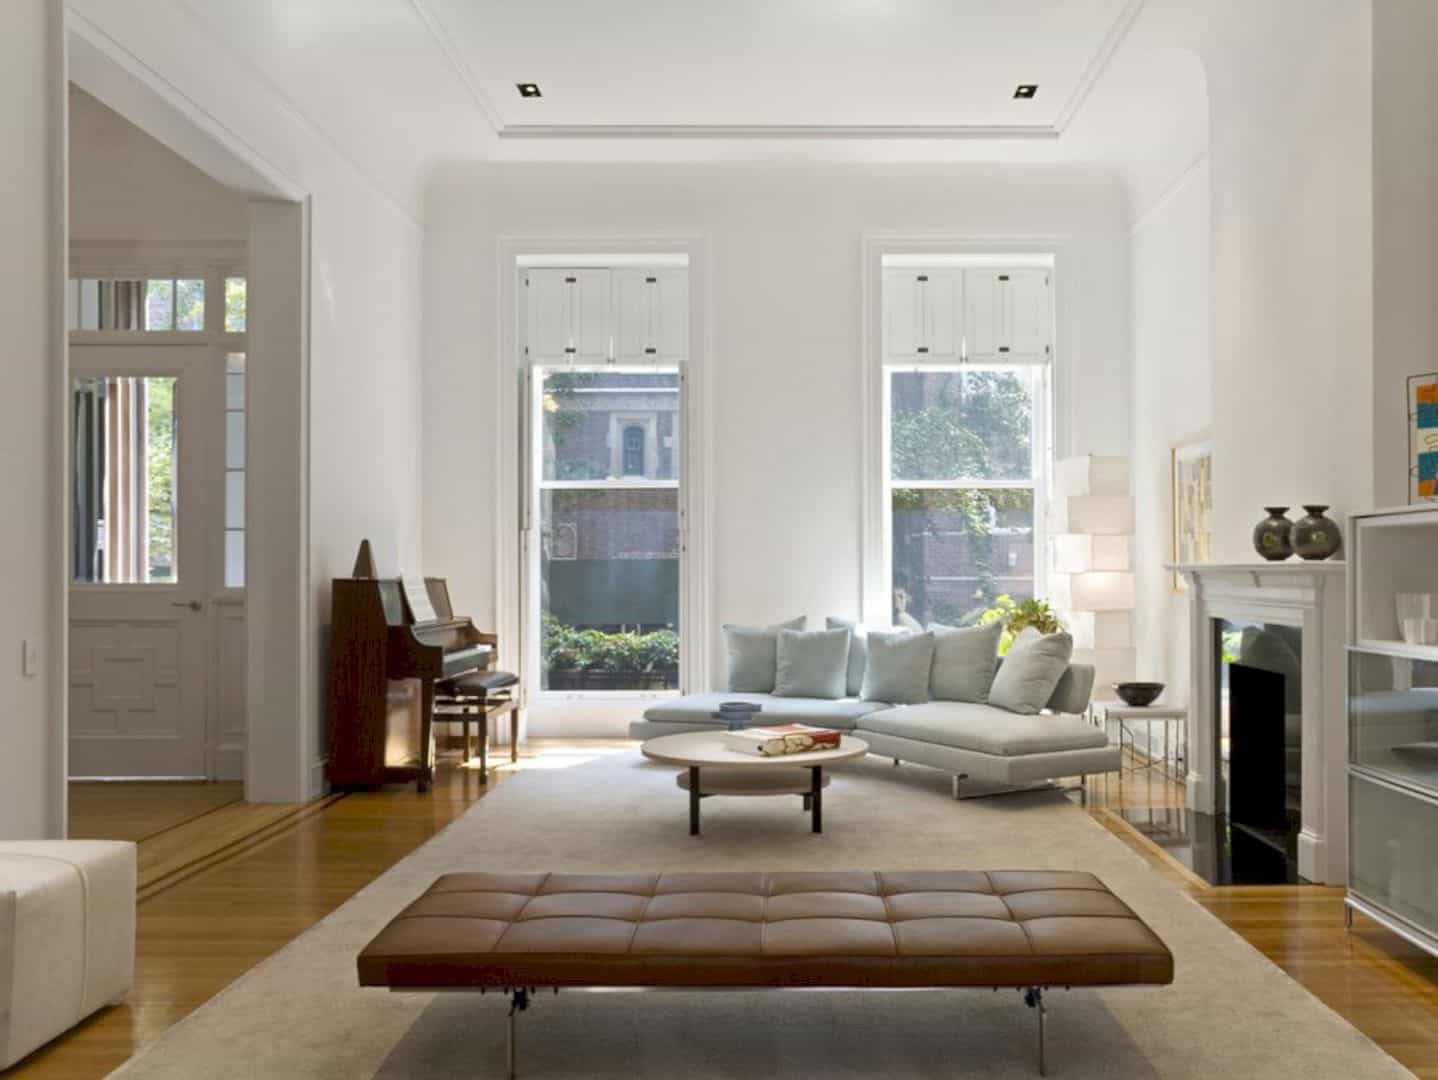 Brooklyn Brownstone A Mid Nineteenth Century Brownstone With Historic And Contemporary Design Elements 2